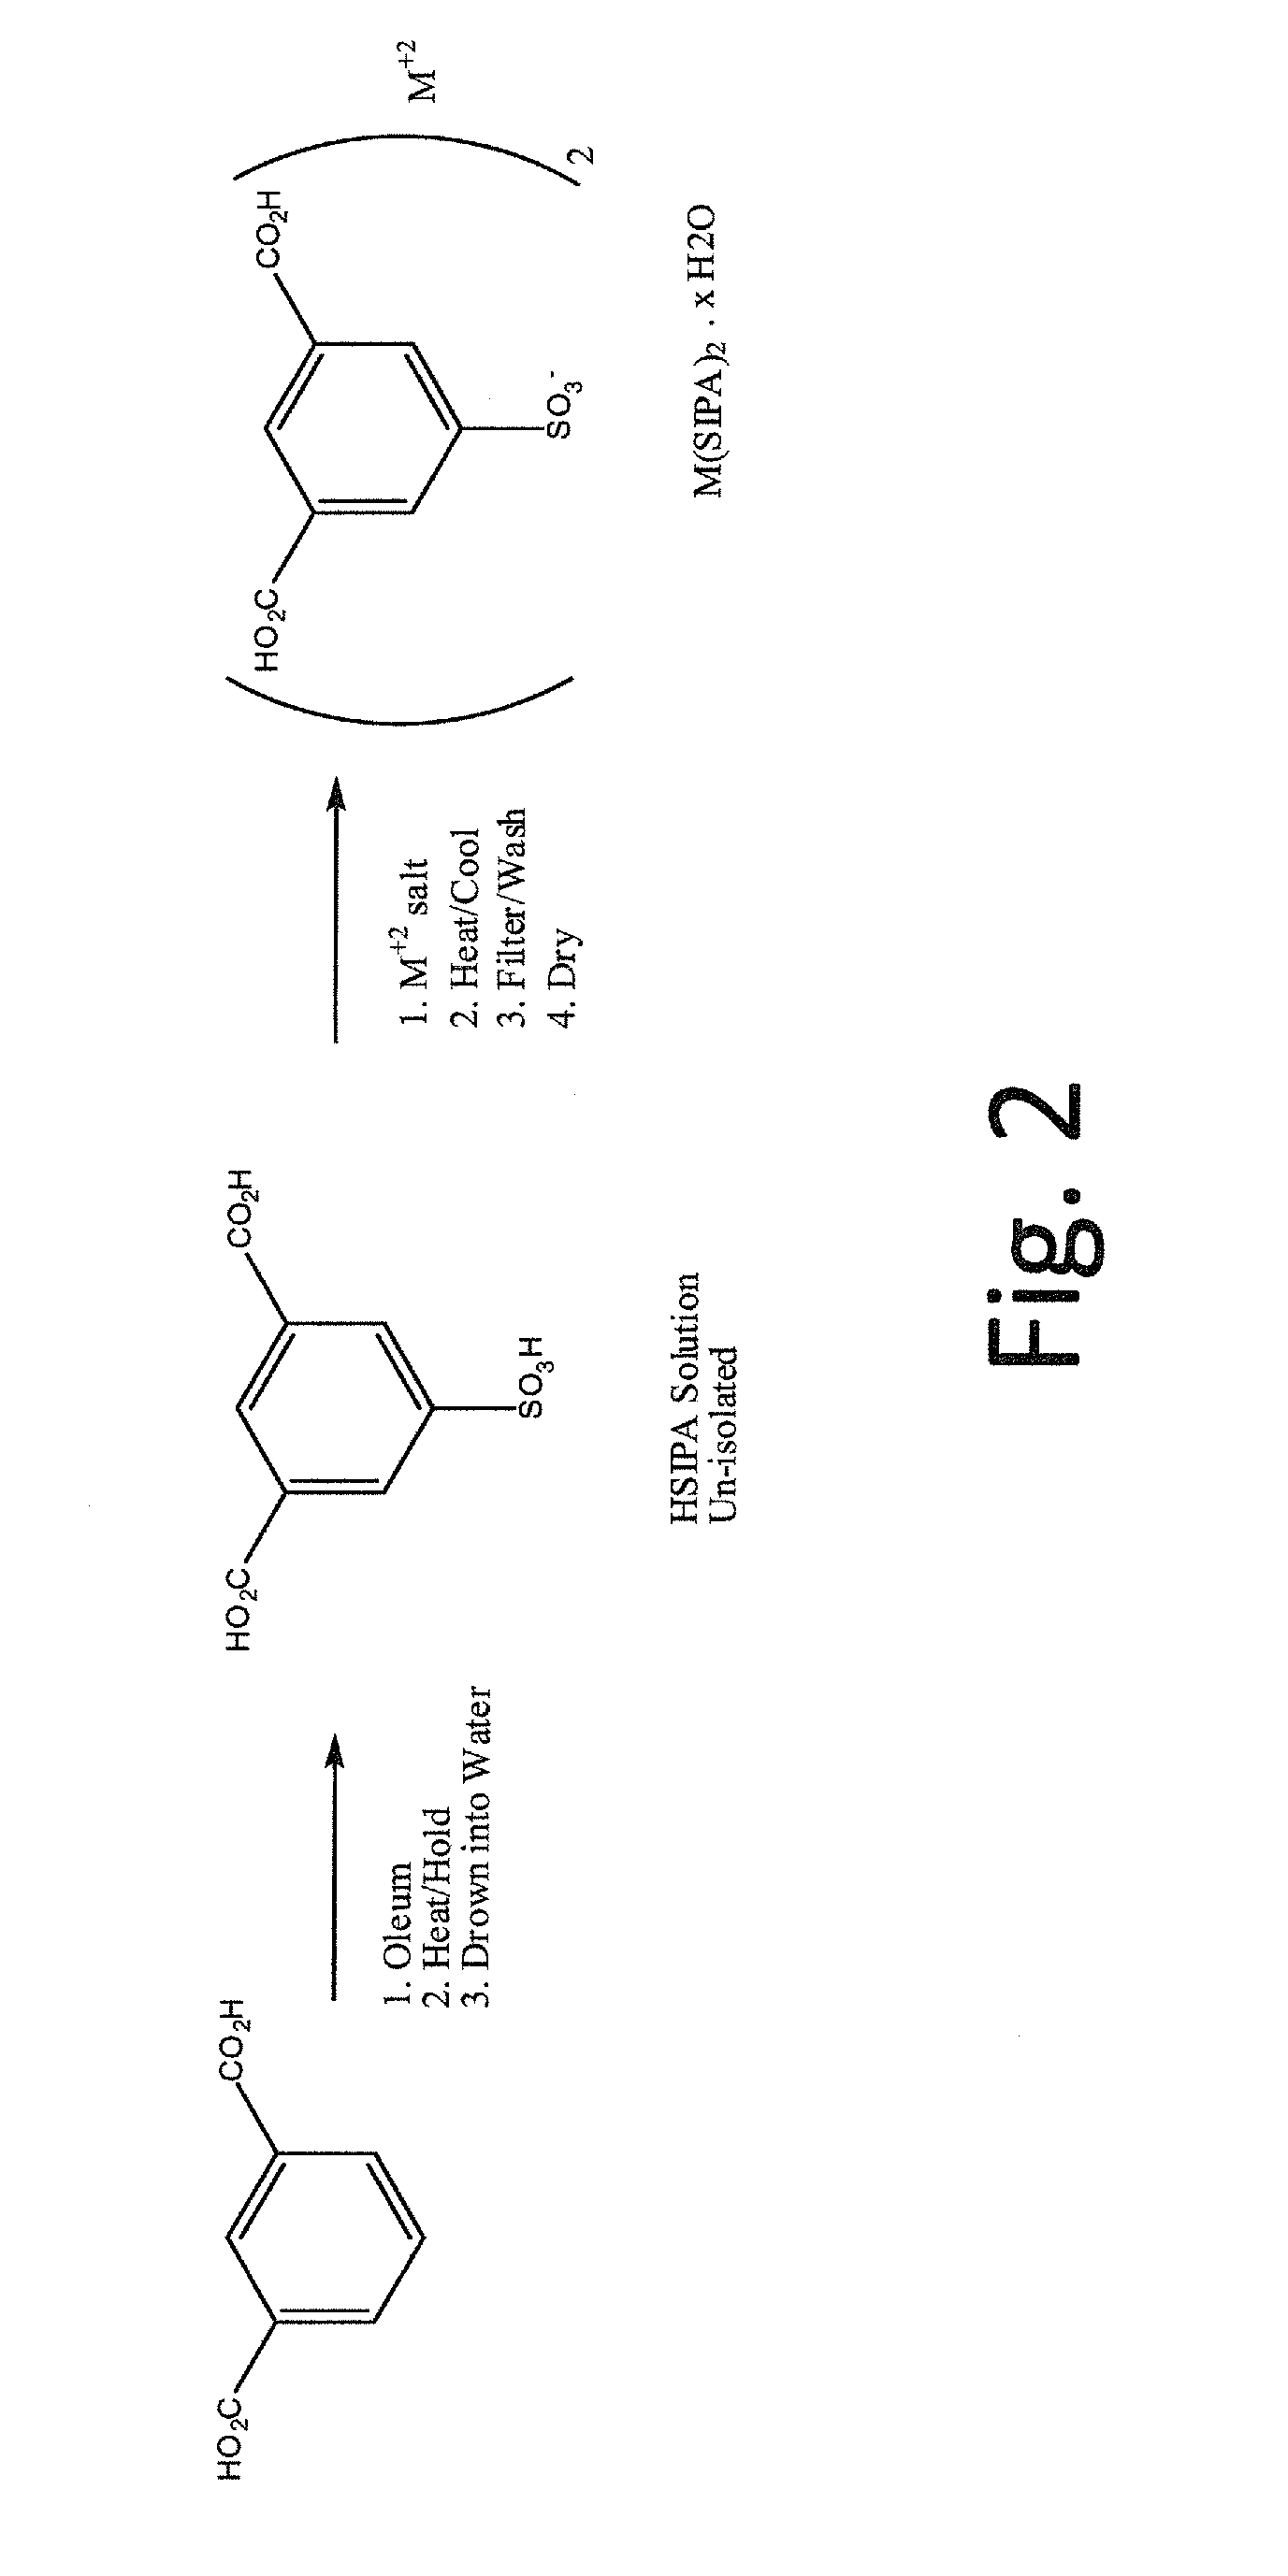 5-sulfoisophthalic acid salts and process for the preparation thereof